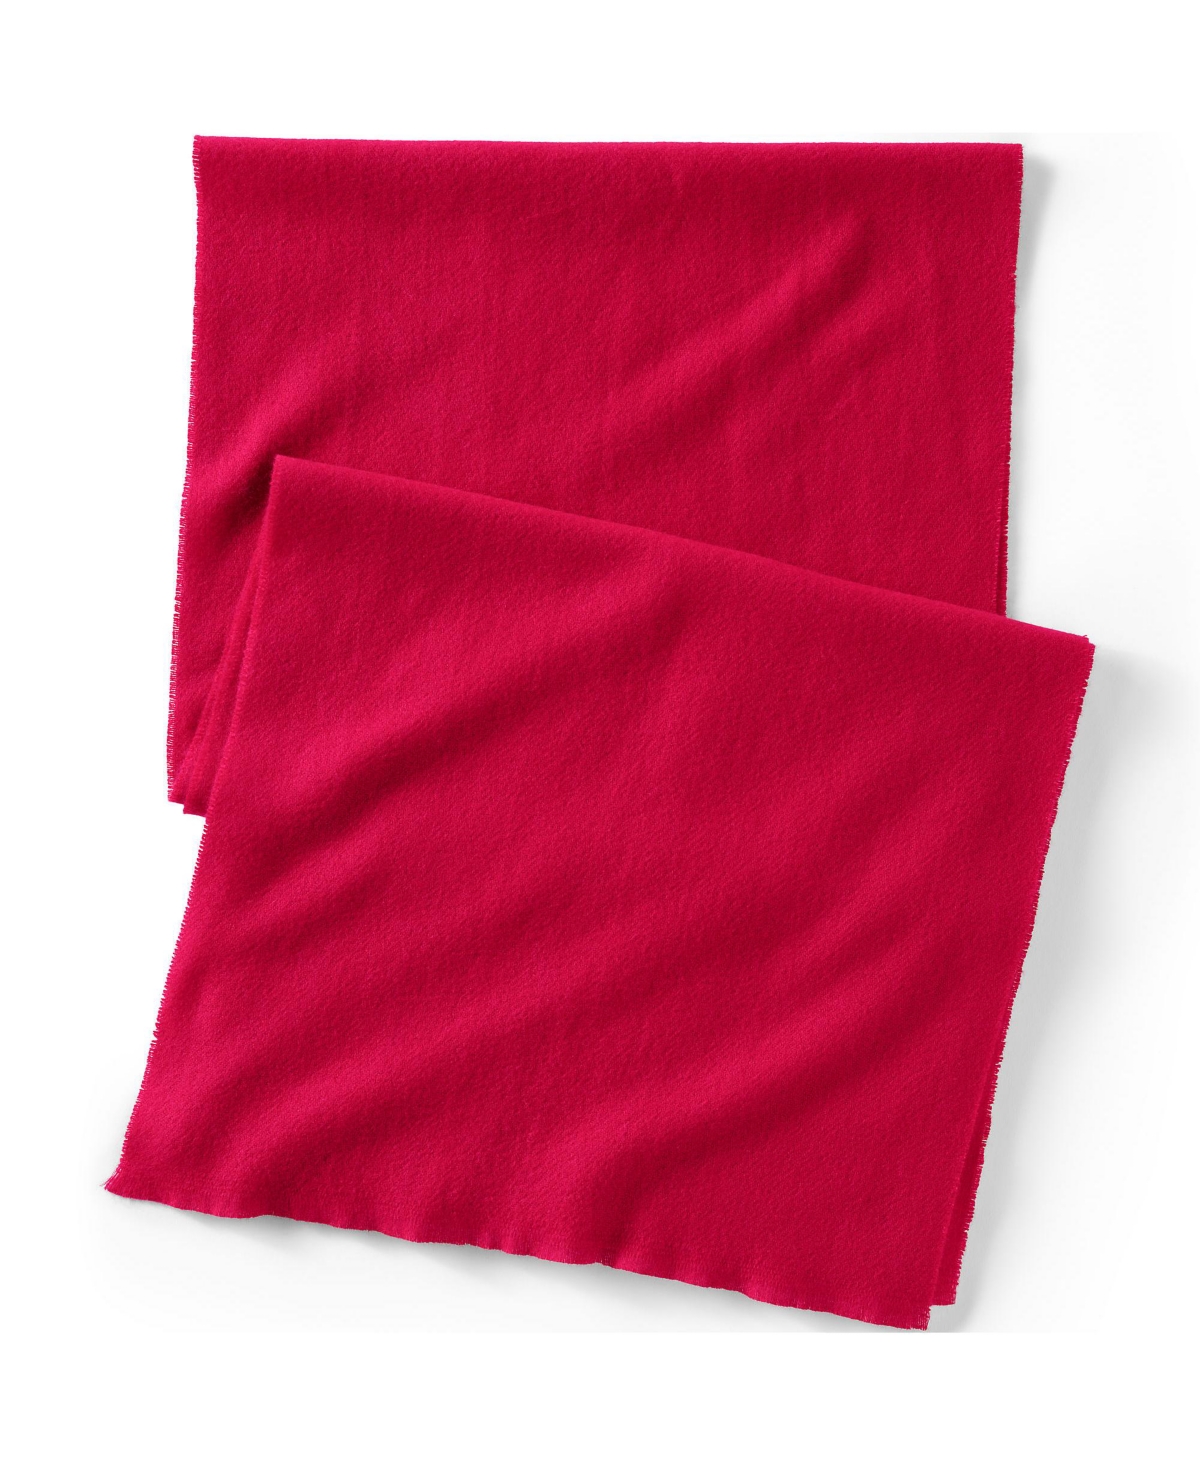 CashTouch Solid Winter Scarf - Rich red